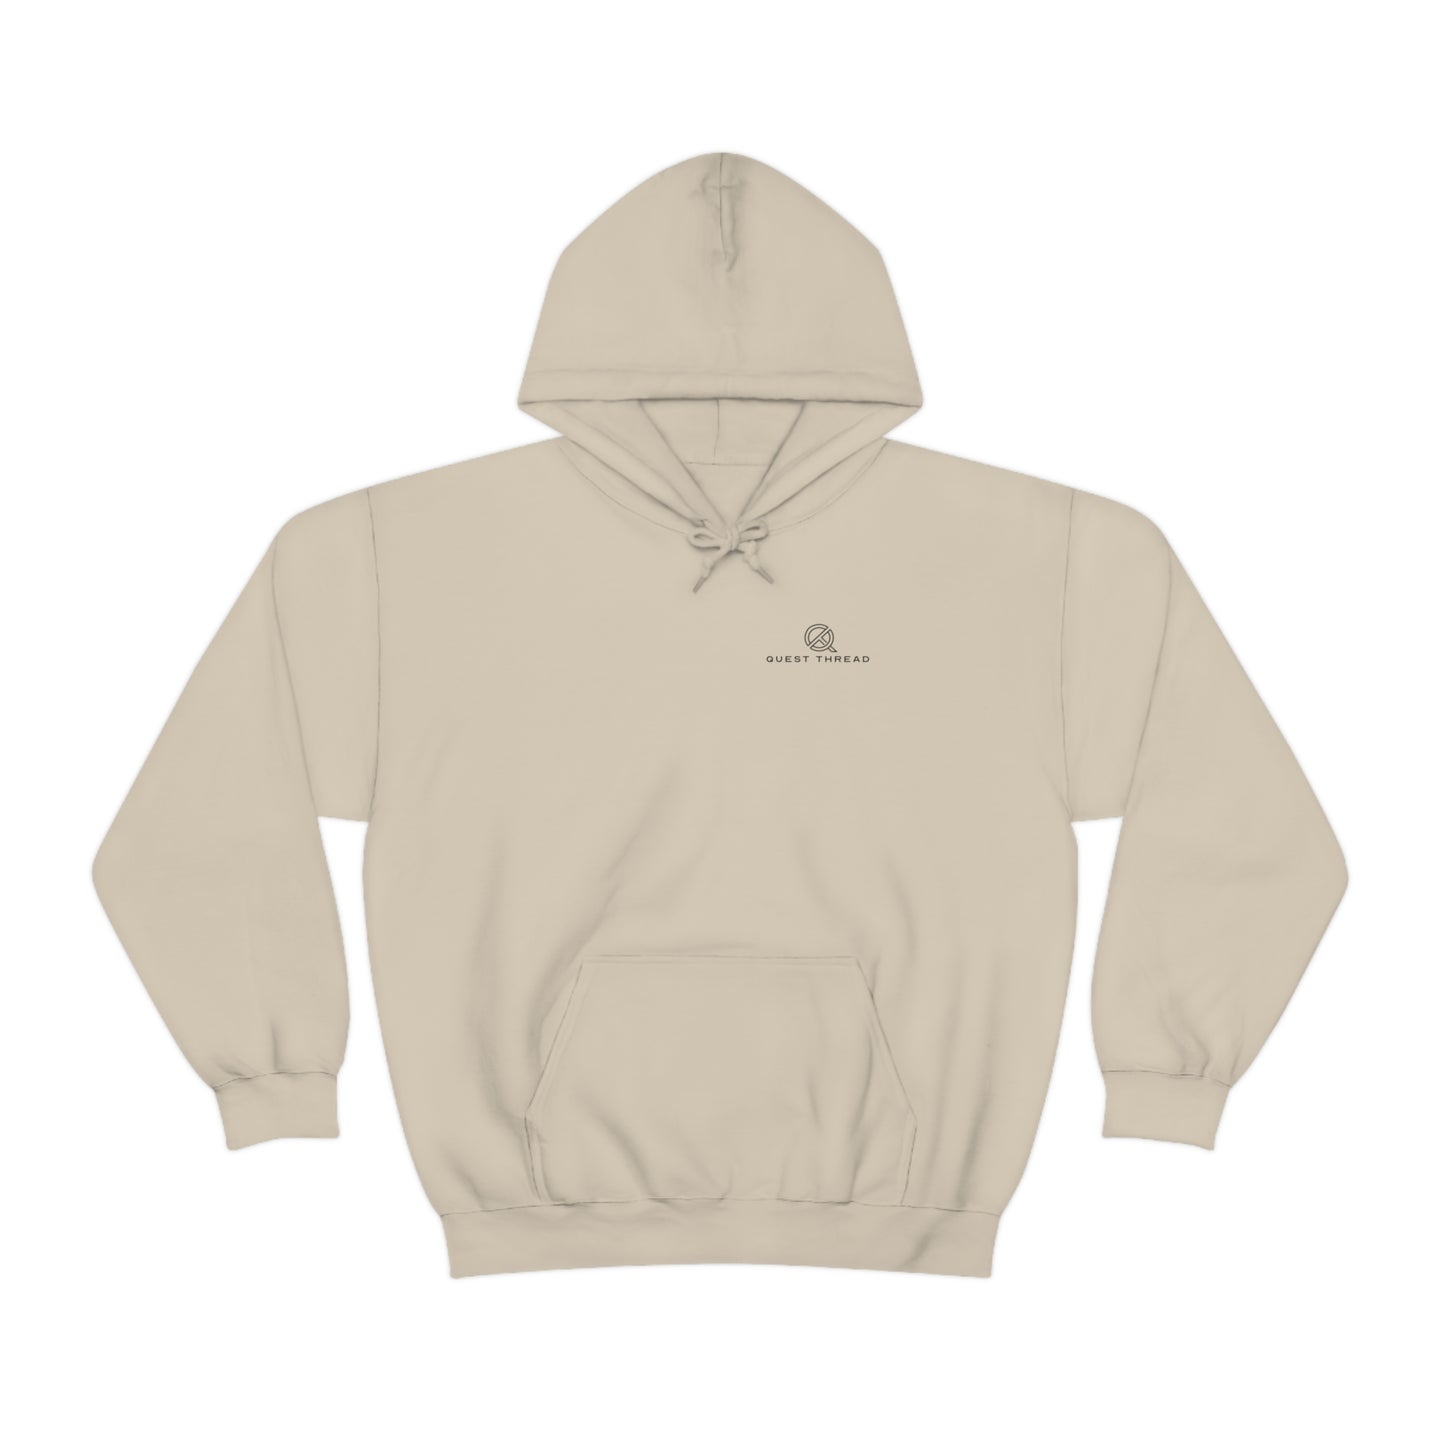 sand-quest-thread-hoodie-with-small-logo-on-left-chest